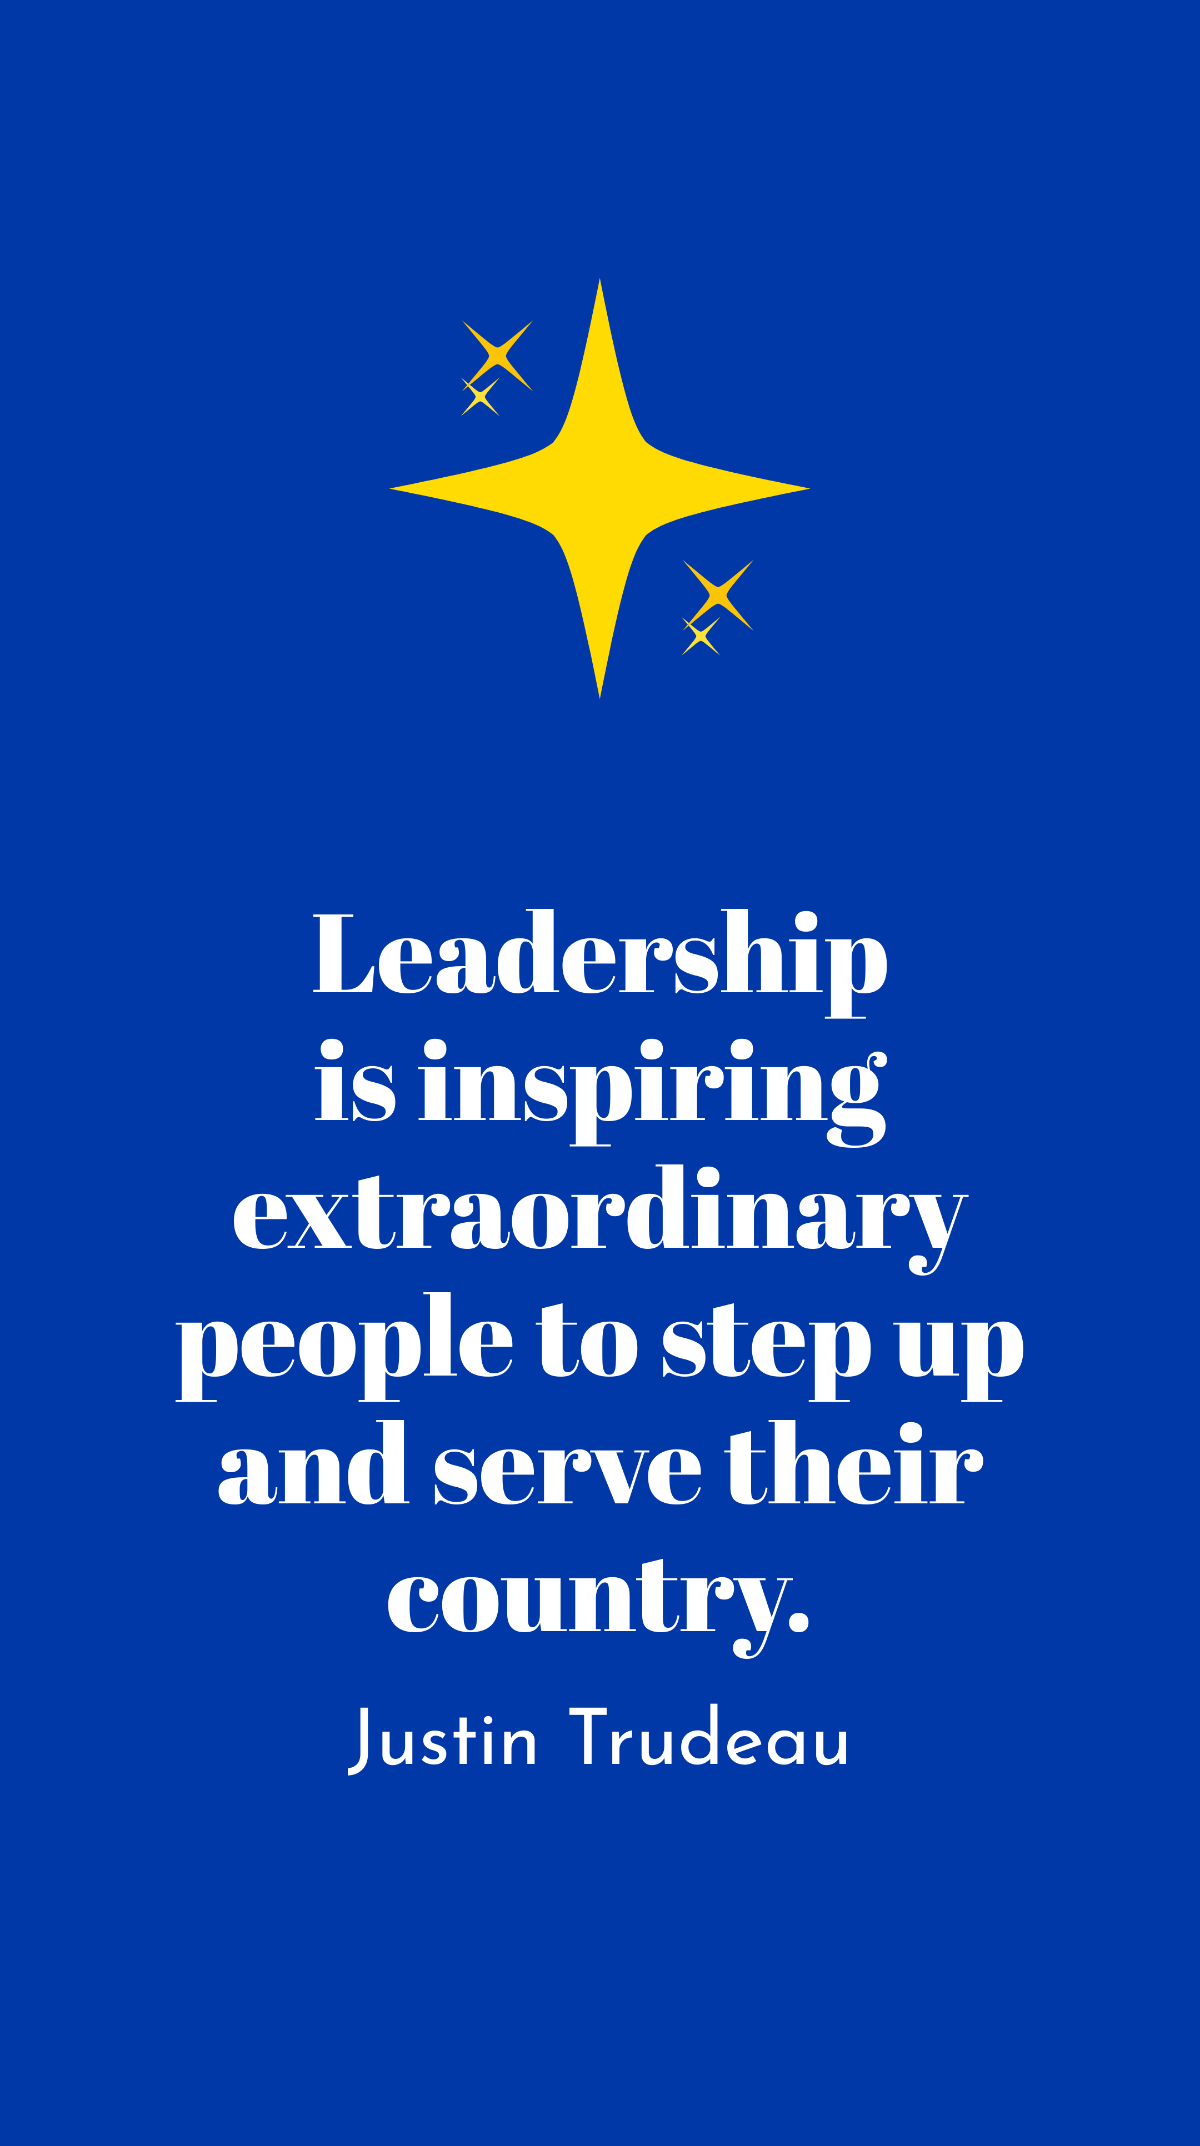 Justin Trudeau - Leadership is inspiring extraordinary people to step up and serve their country. Template